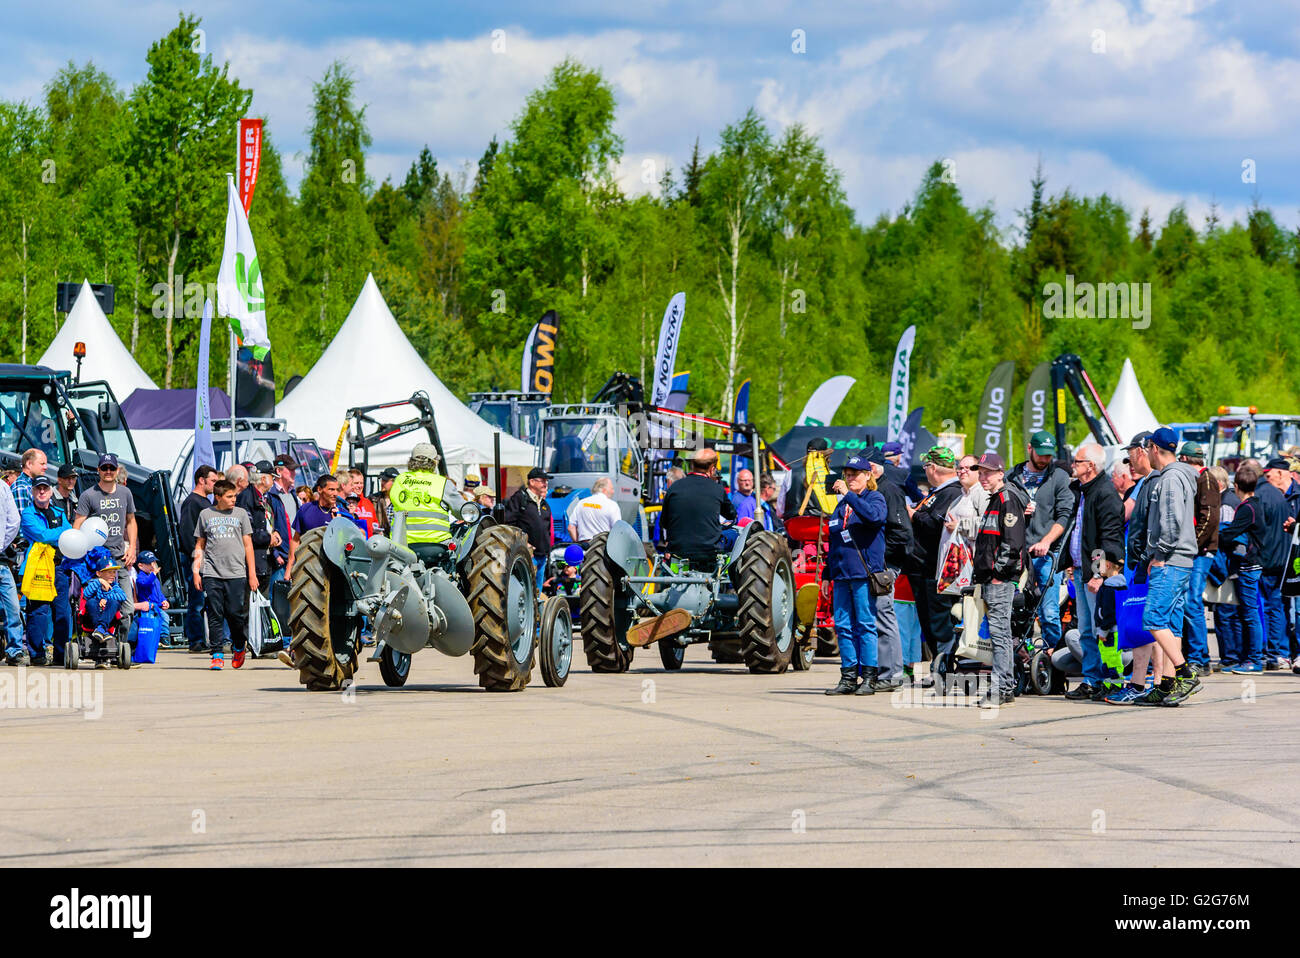 Emmaboda, Sweden - May 14, 2016: Forest and tractor (Skog och traktor) fair. Vintage classic tractors on parade. Interested crow Stock Photo